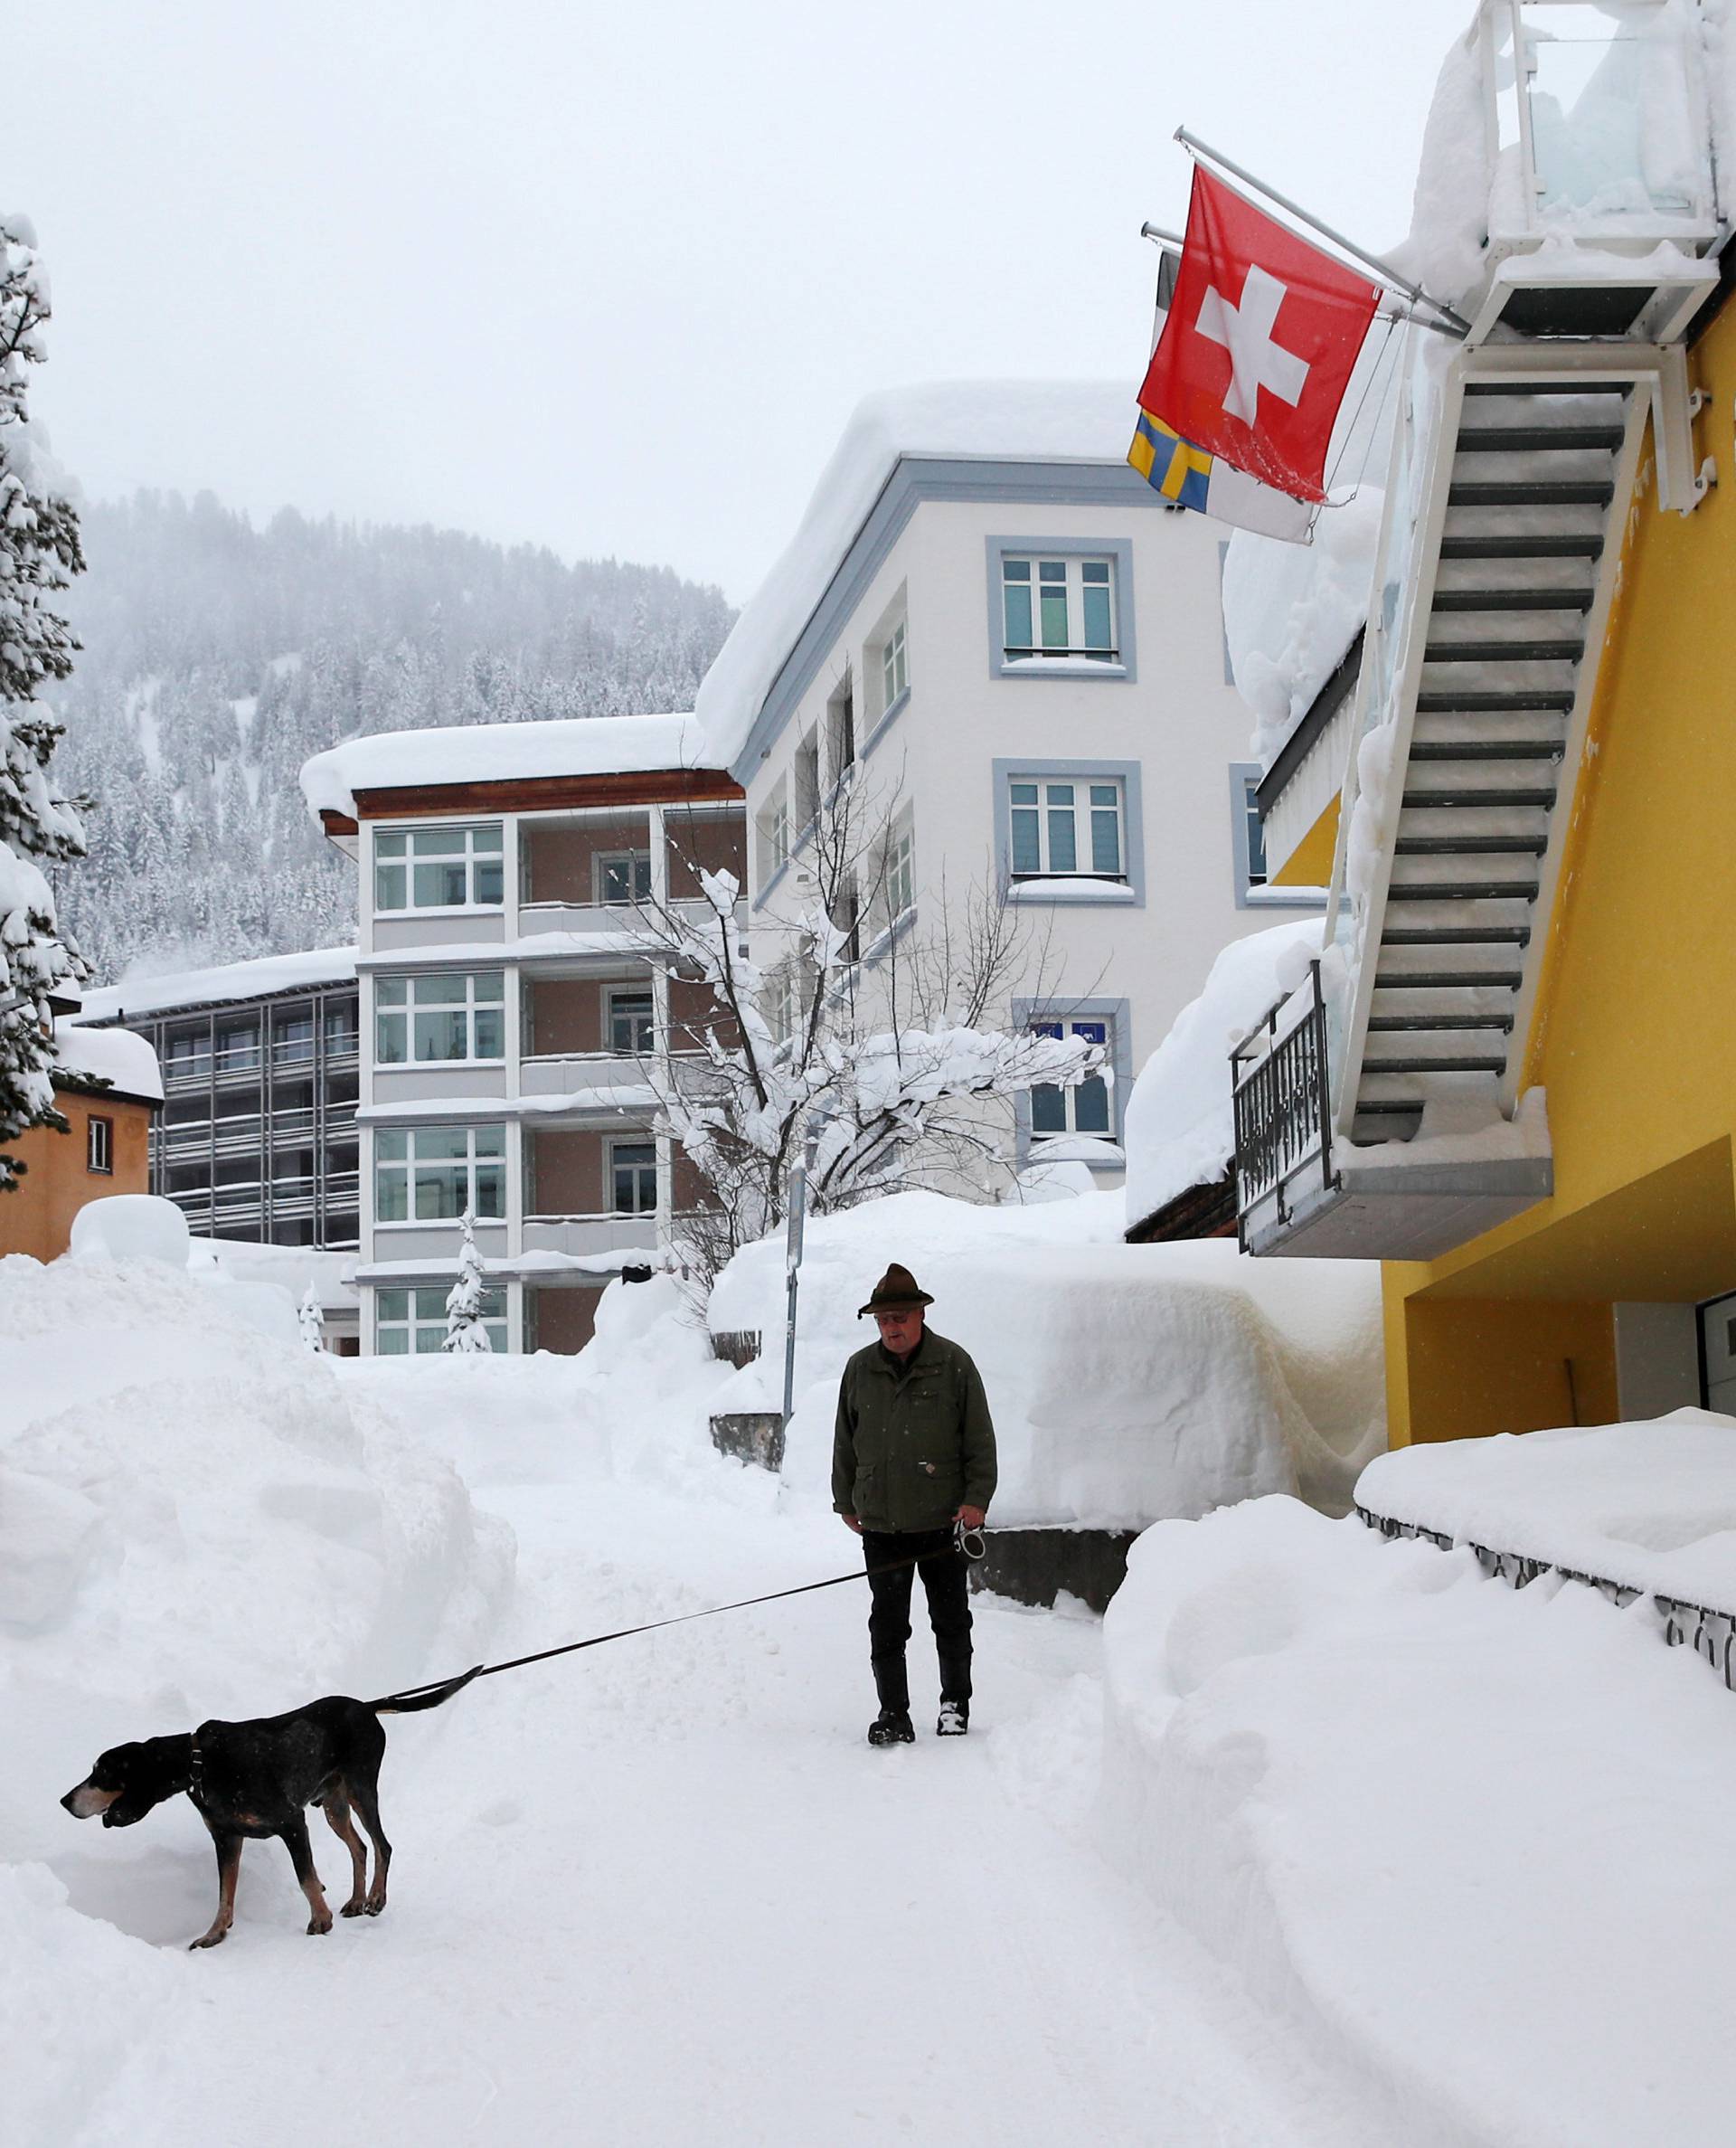 A man walks his dog after a snowfall ahead of the World Economic Forum (WEF) annual meeting in the Swiss Alps resort of Davos